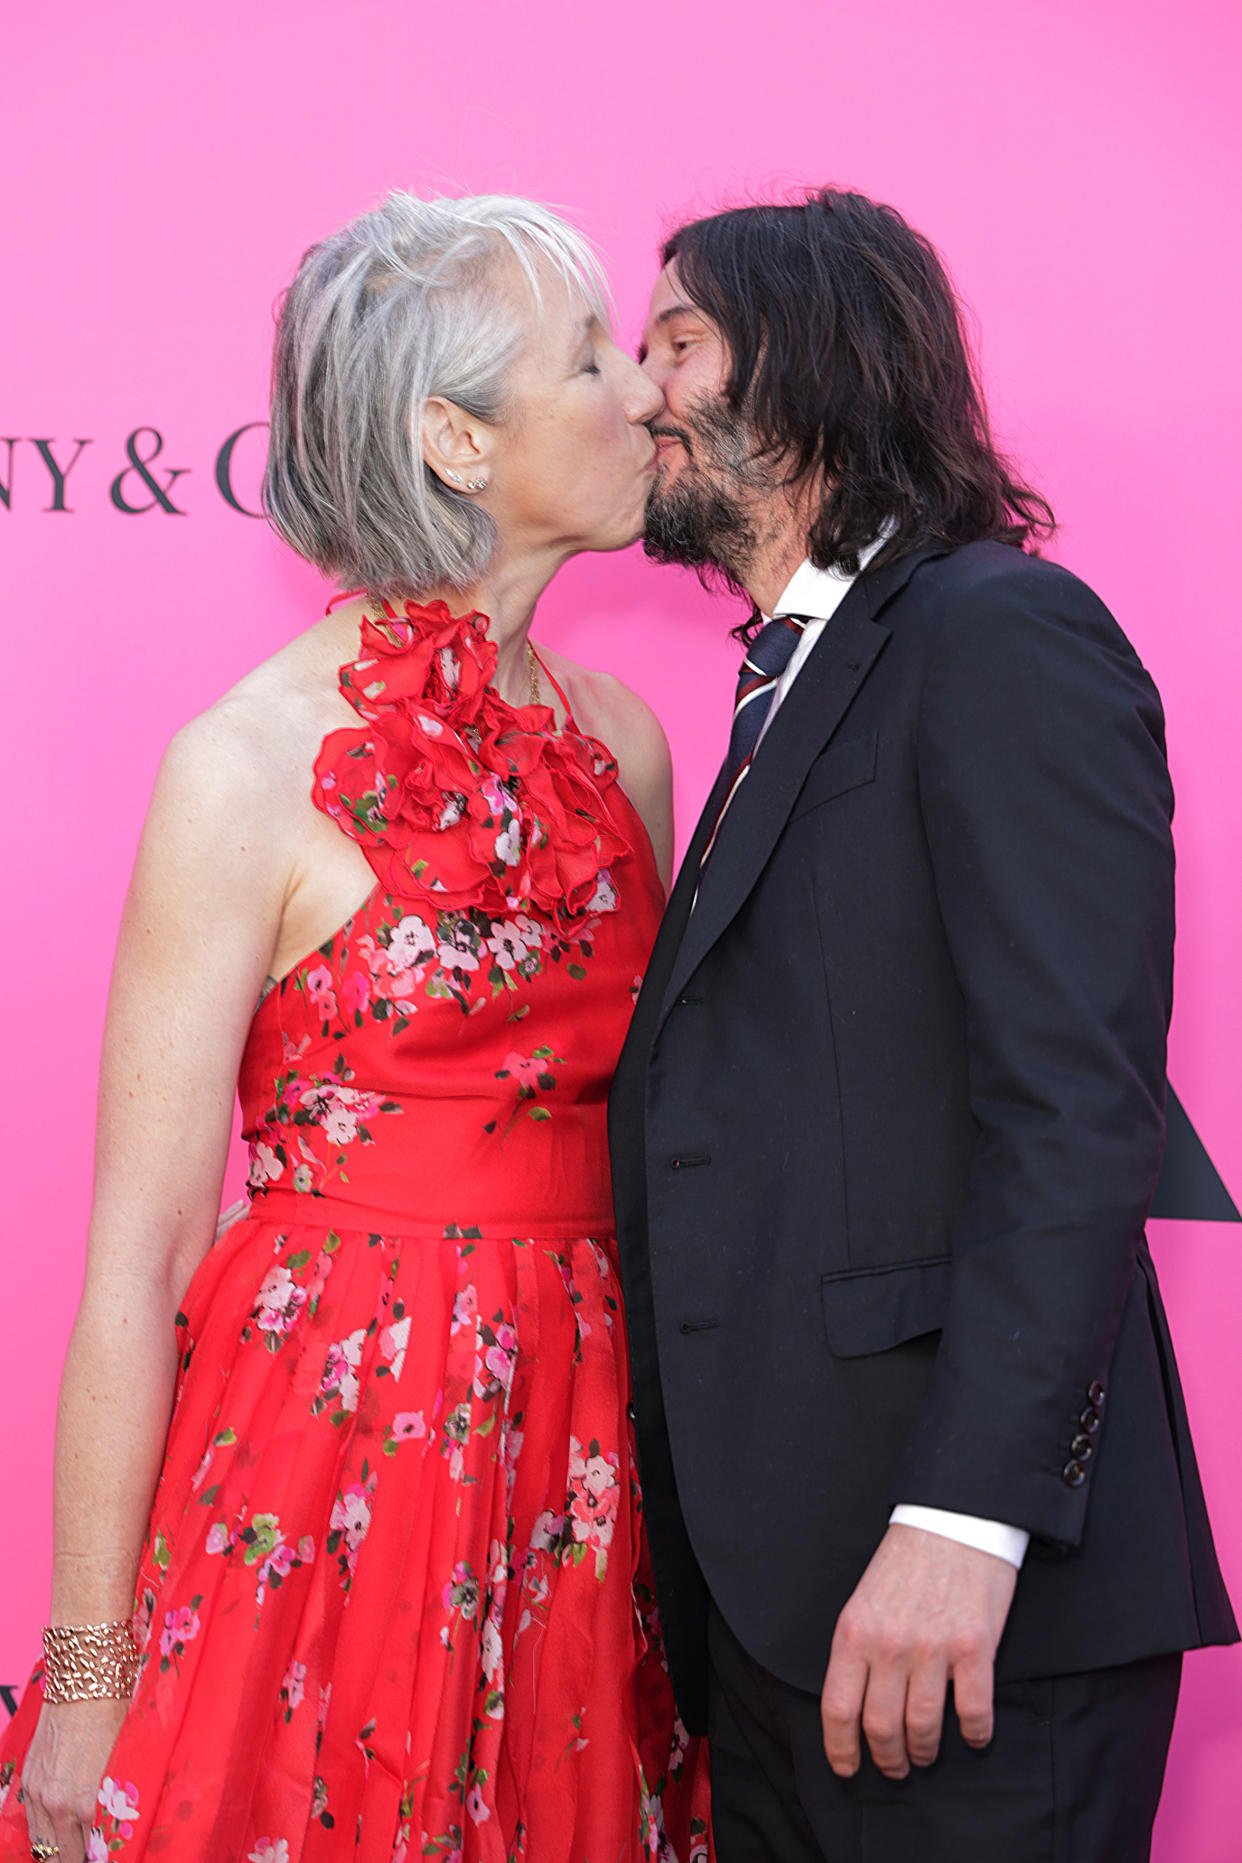 The couple kissed for the cameras on Saturday. (Photo: Momodu Mansaray/WireImage)